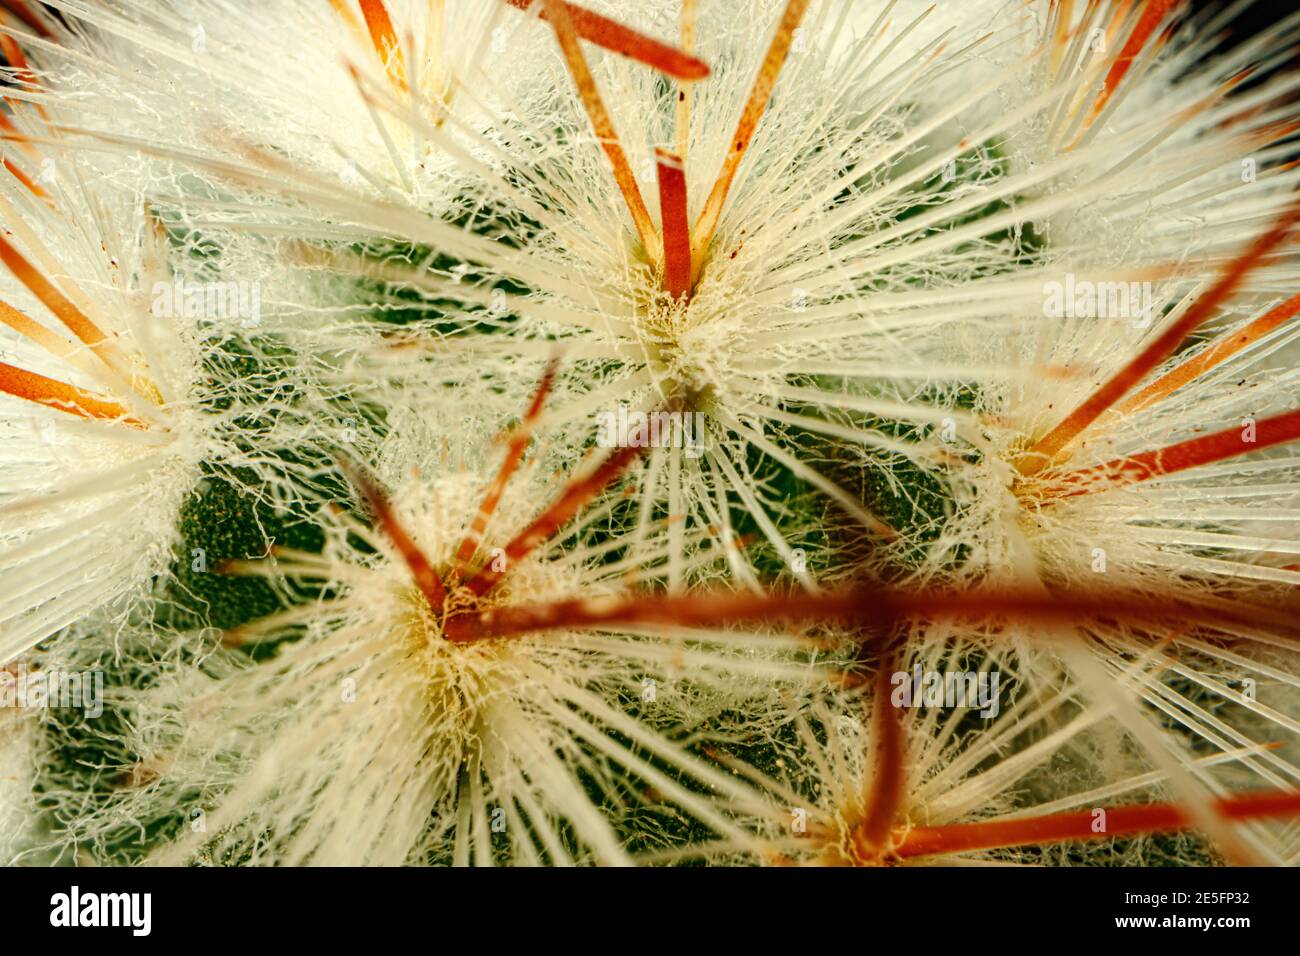 Macro photo of green cactus with spines Stock Photo